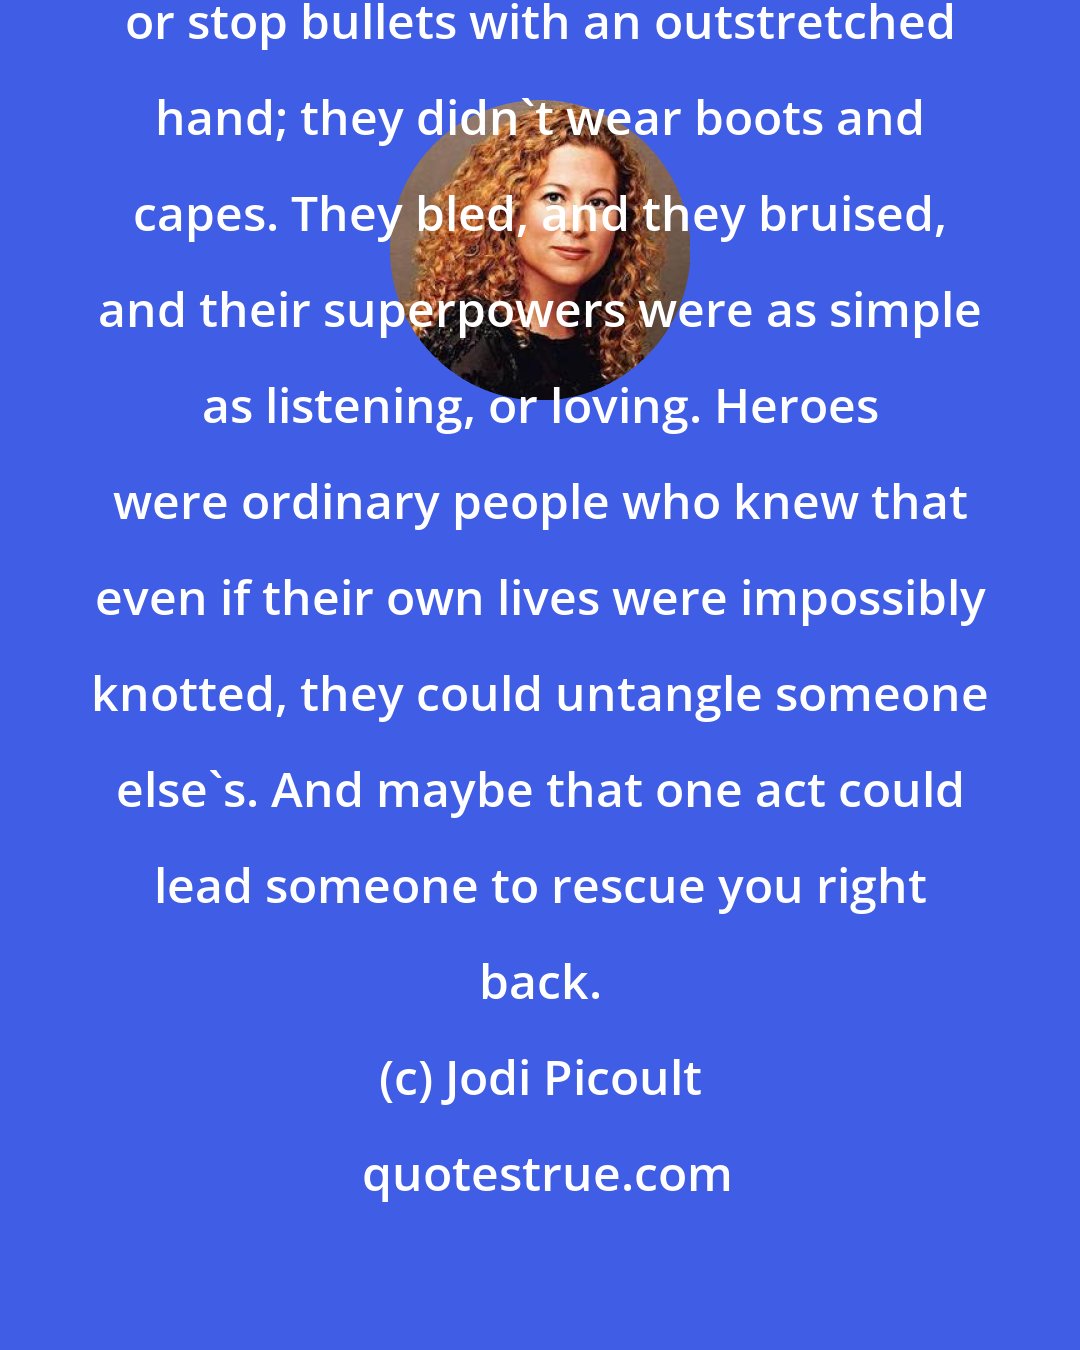 Jodi Picoult: Heroes didn't leap tall buildings or stop bullets with an outstretched hand; they didn't wear boots and capes. They bled, and they bruised, and their superpowers were as simple as listening, or loving. Heroes were ordinary people who knew that even if their own lives were impossibly knotted, they could untangle someone else's. And maybe that one act could lead someone to rescue you right back.